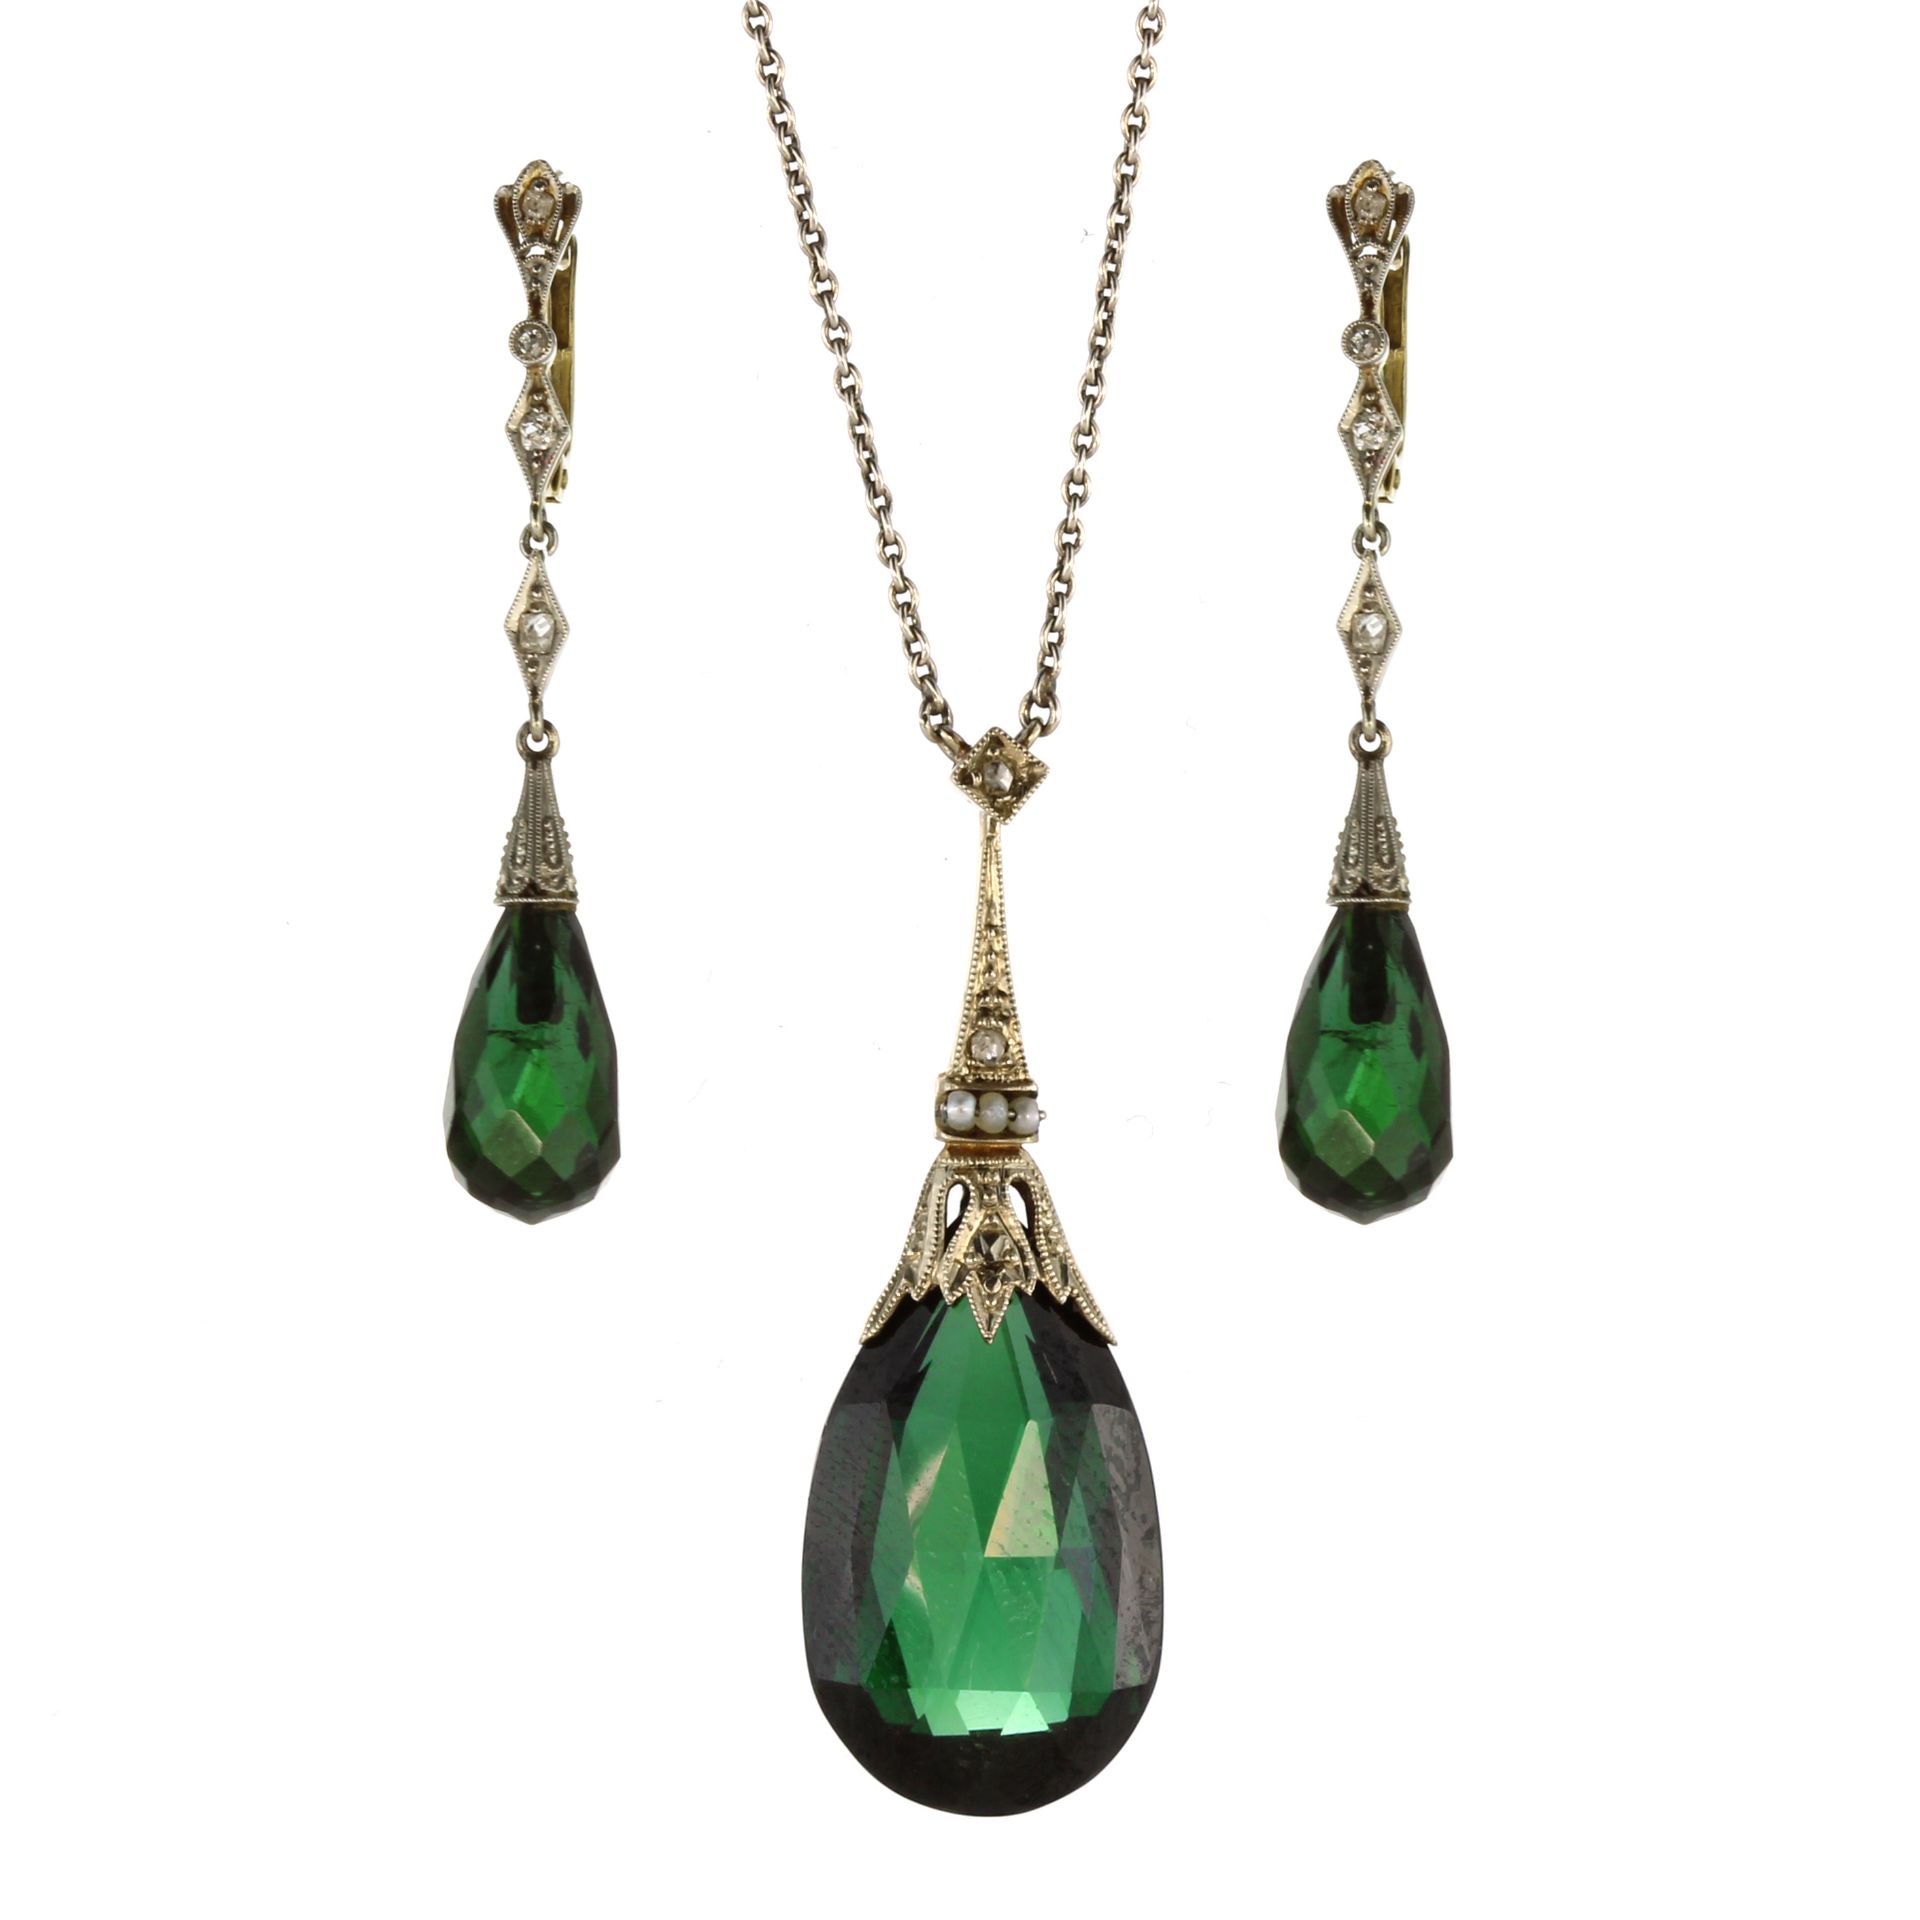 A green tourmaline and diamond necklace and earrings set in 14ct gold each piece designed as a